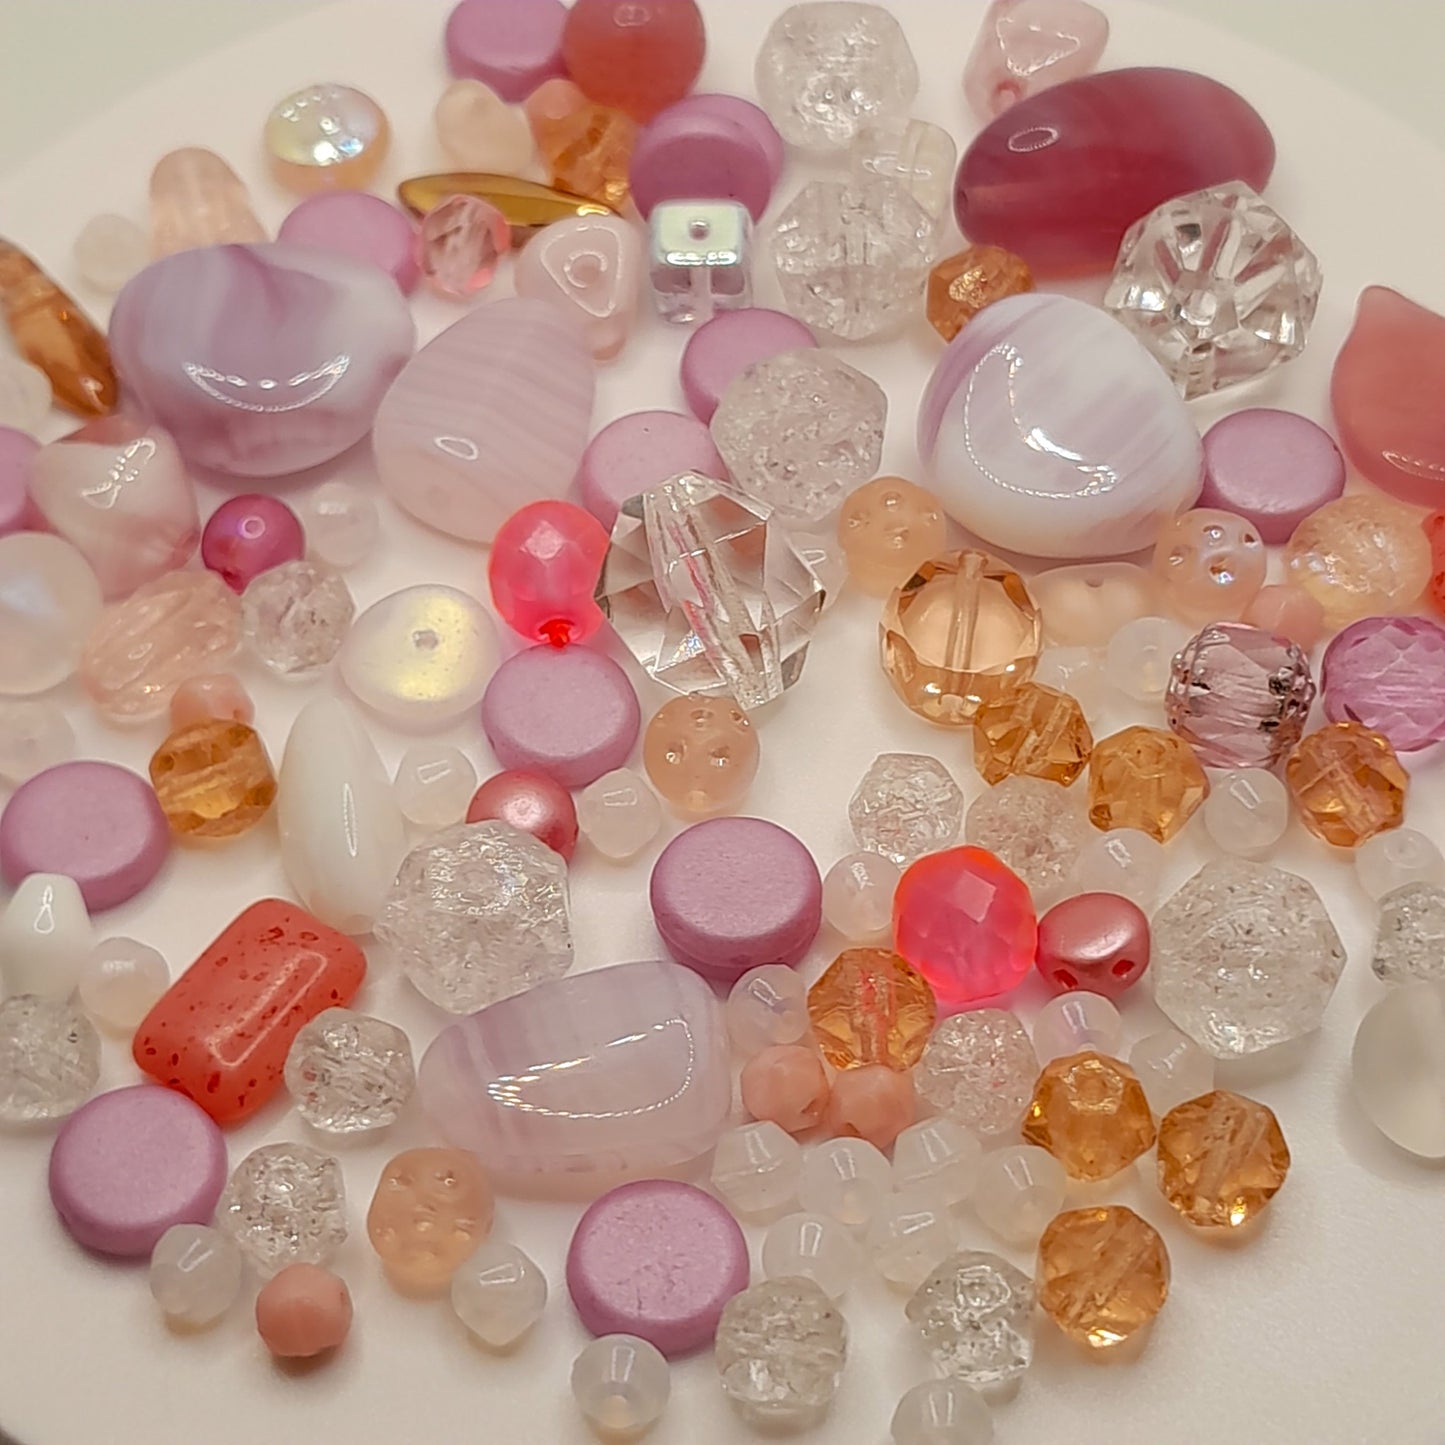 PRECIOSA czech beads "Little princess" for making bracelets, necklaces, earrings and other jewelry. - VadymShop